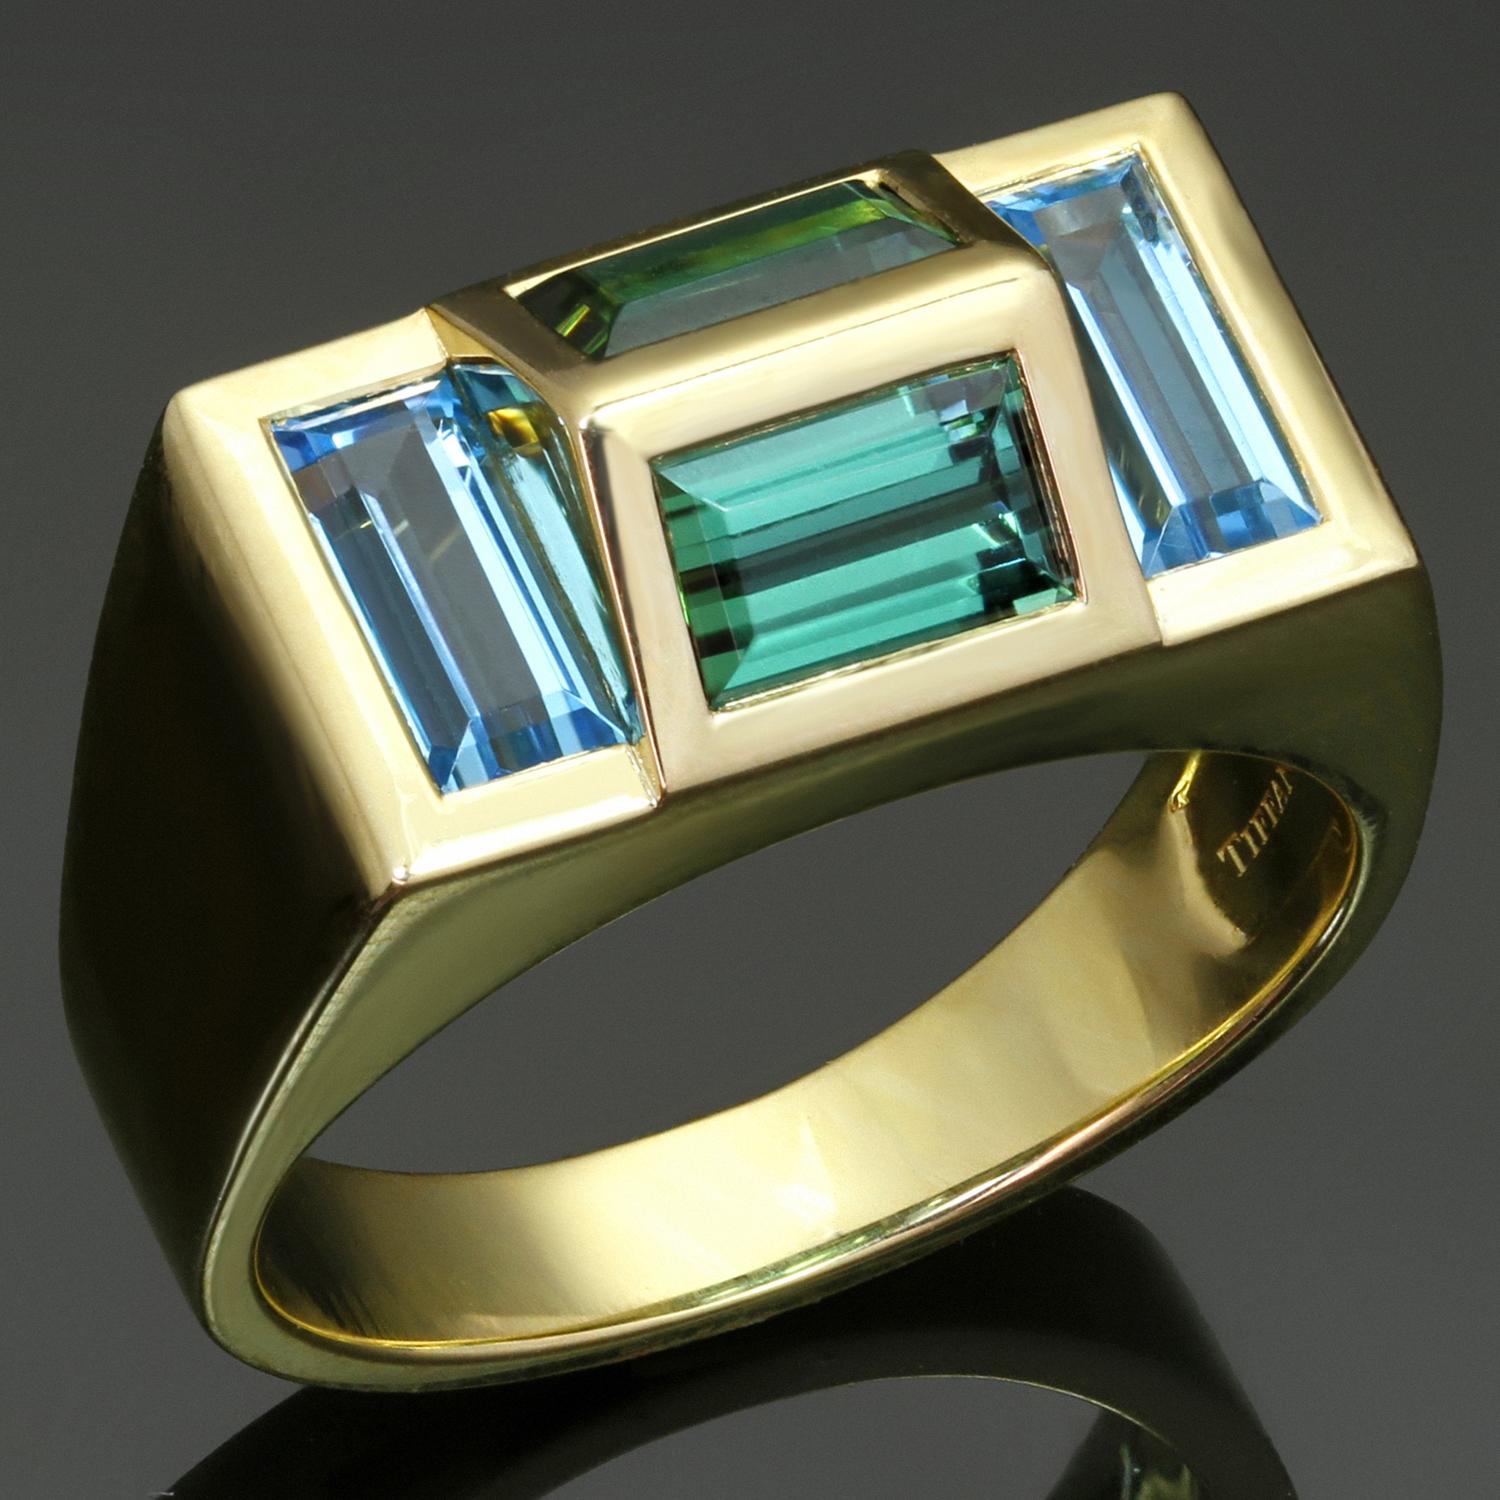 This fabulous authentic Tiffany & Co. Paloma's Studio 4-stone ring is crafted in 18k yellow gold and set with a pair of blue topaz baguettes weighing an estimated 2.25 carats and a pair of green tourmaline baugettes weighting an estimated 2.80